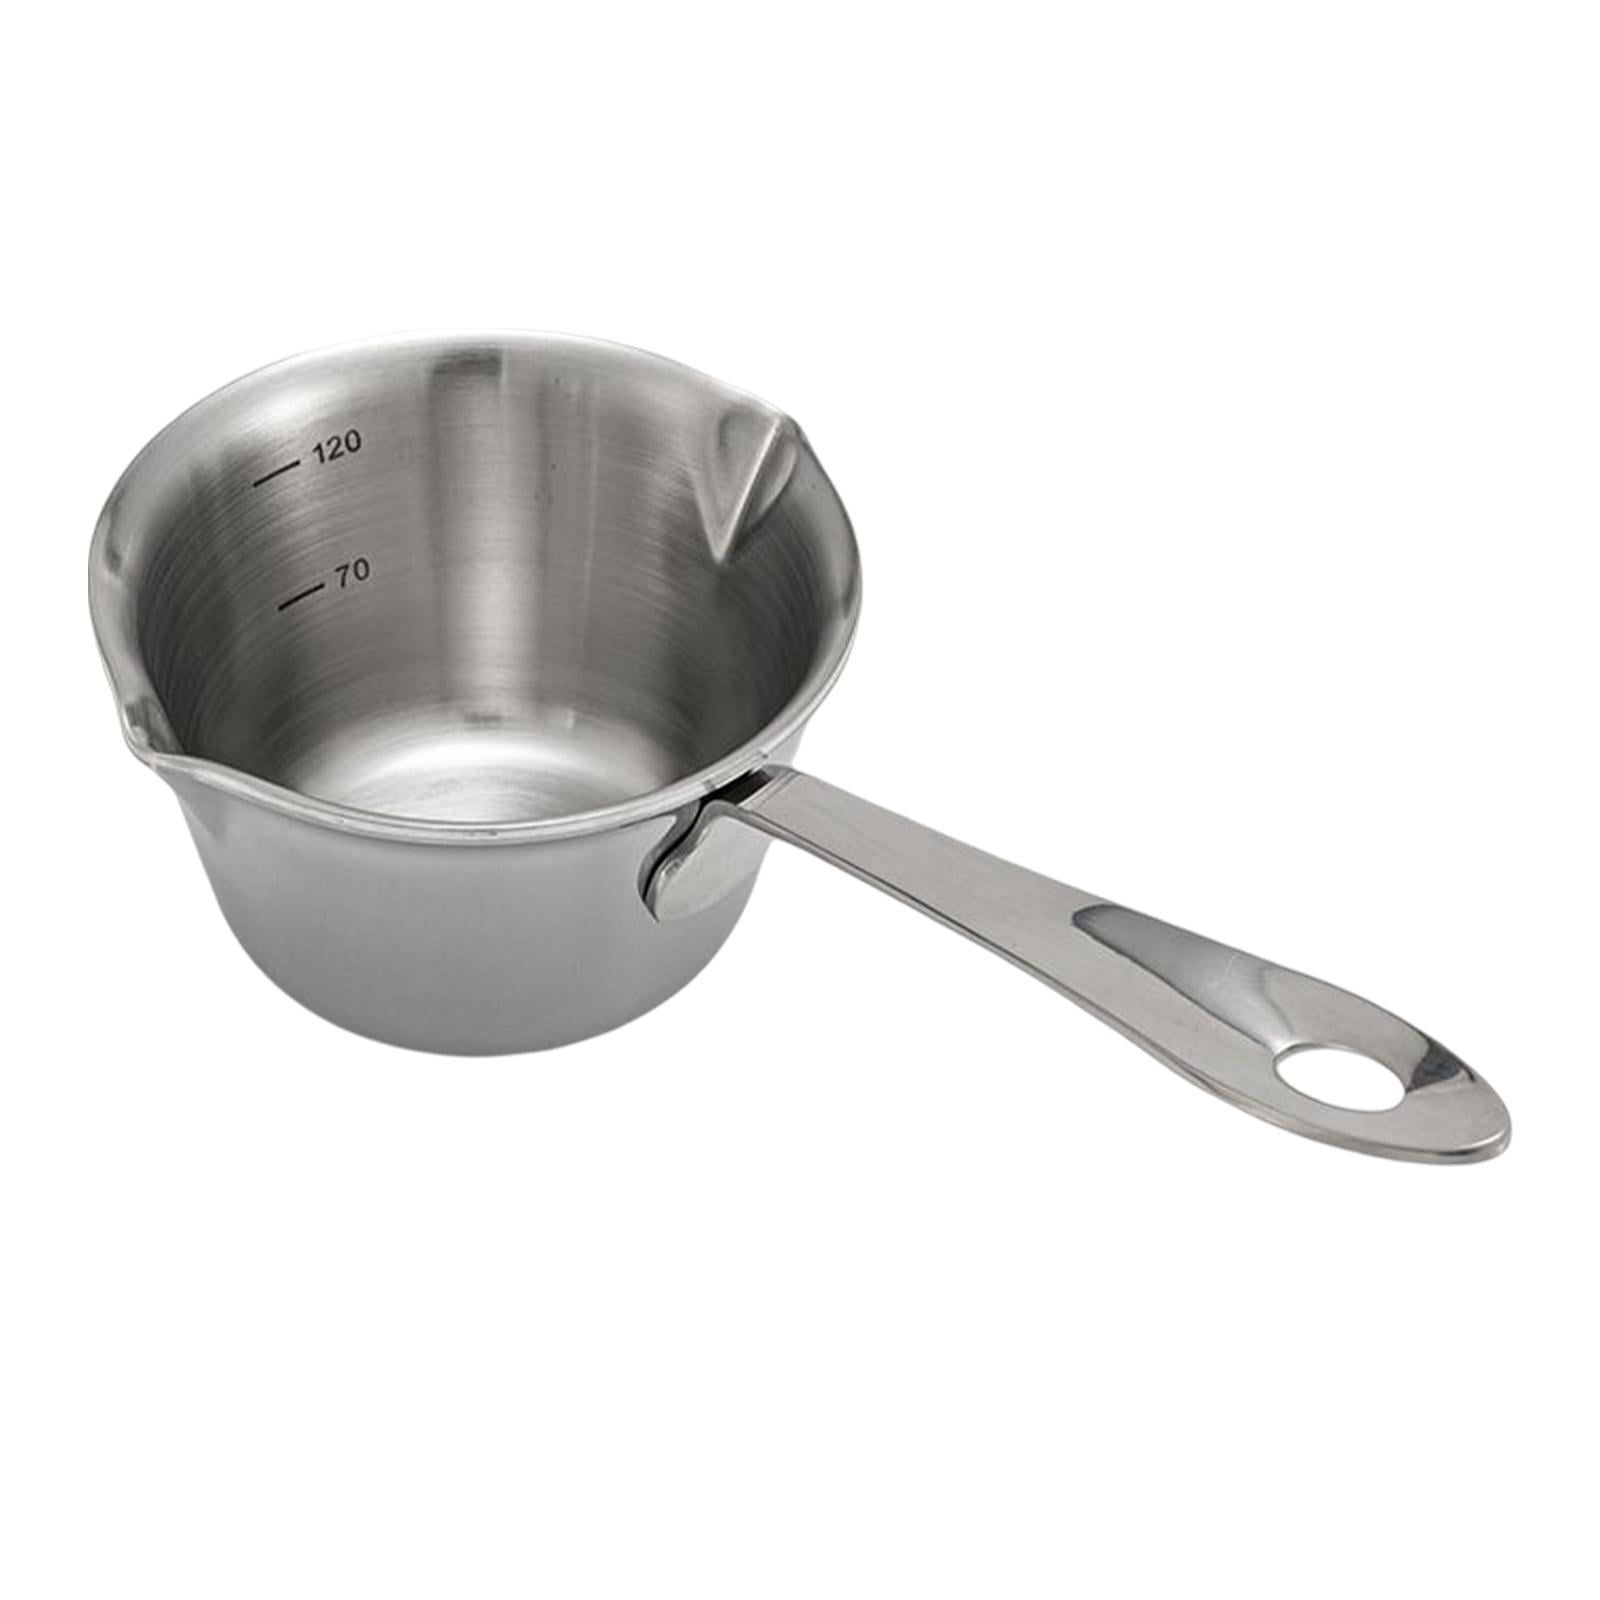 Stainless Steel Milk Pot Milk Pan with Lid Boiling Pot for Coffee or  Porridge - 18cm